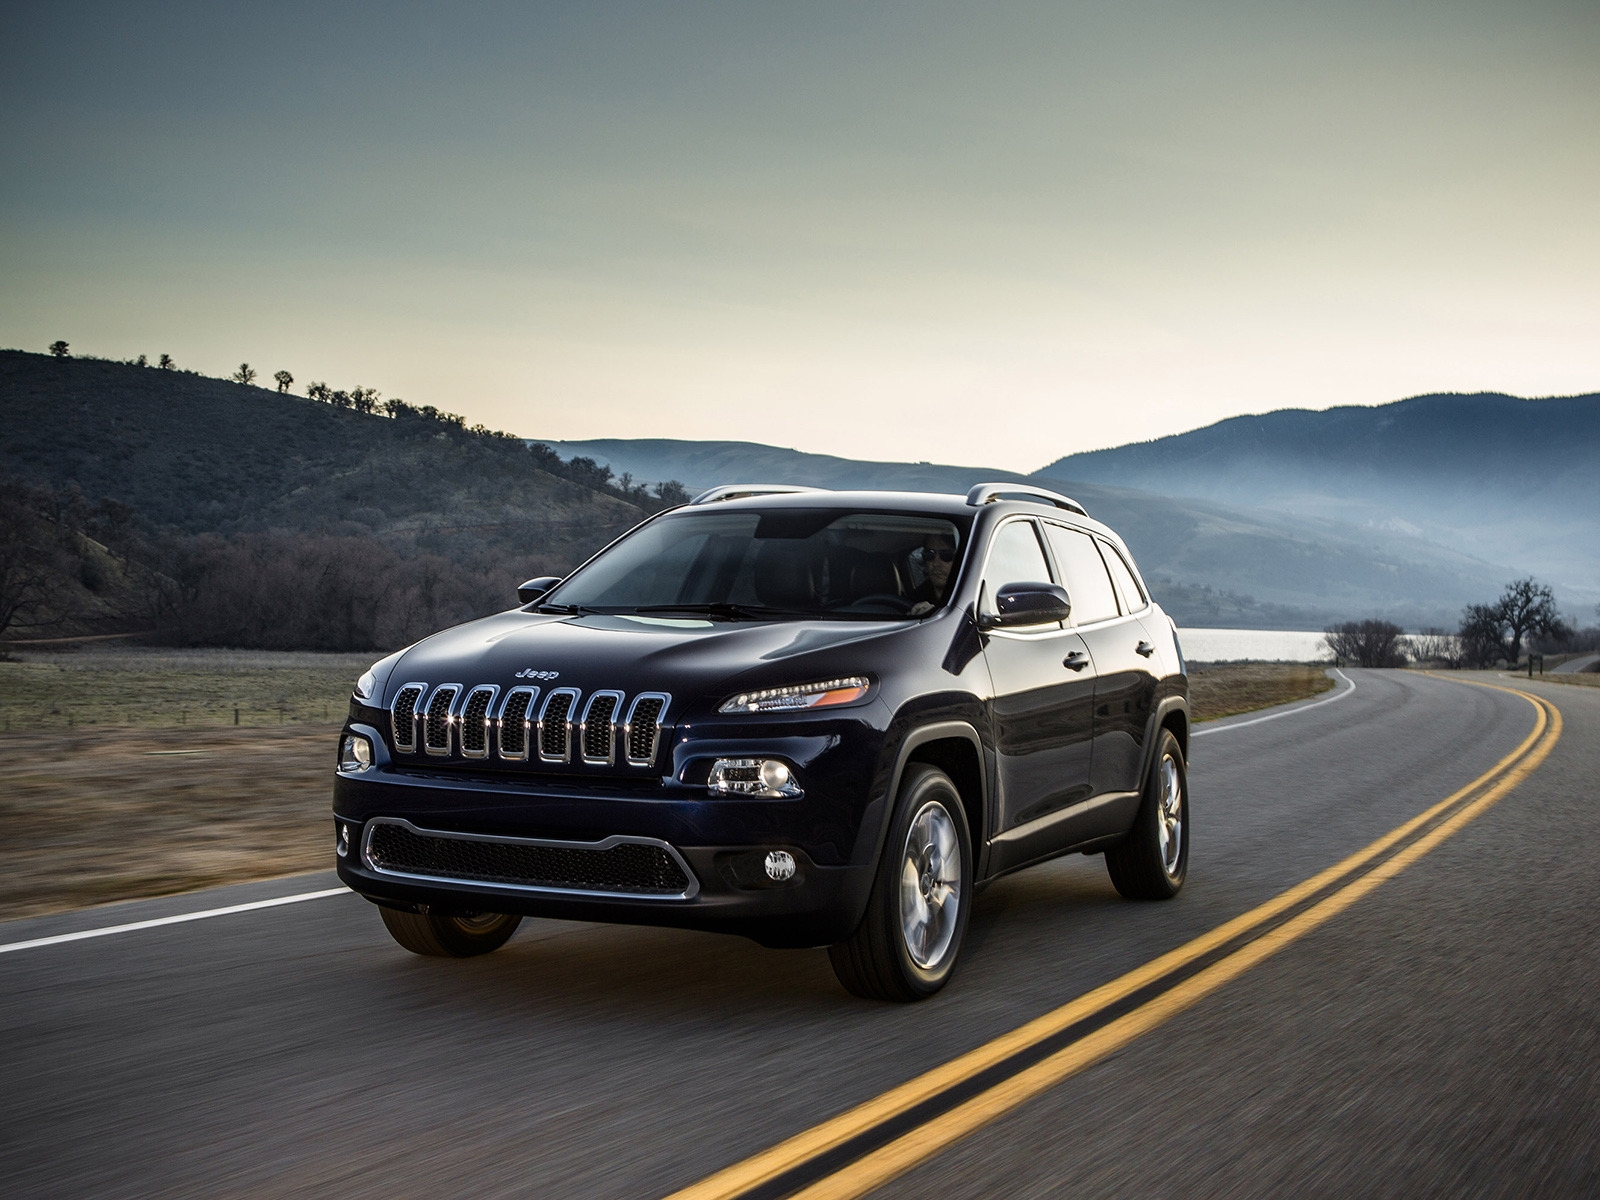 Jeep Cherokee 2014 Edition for 1600 x 1200 resolution